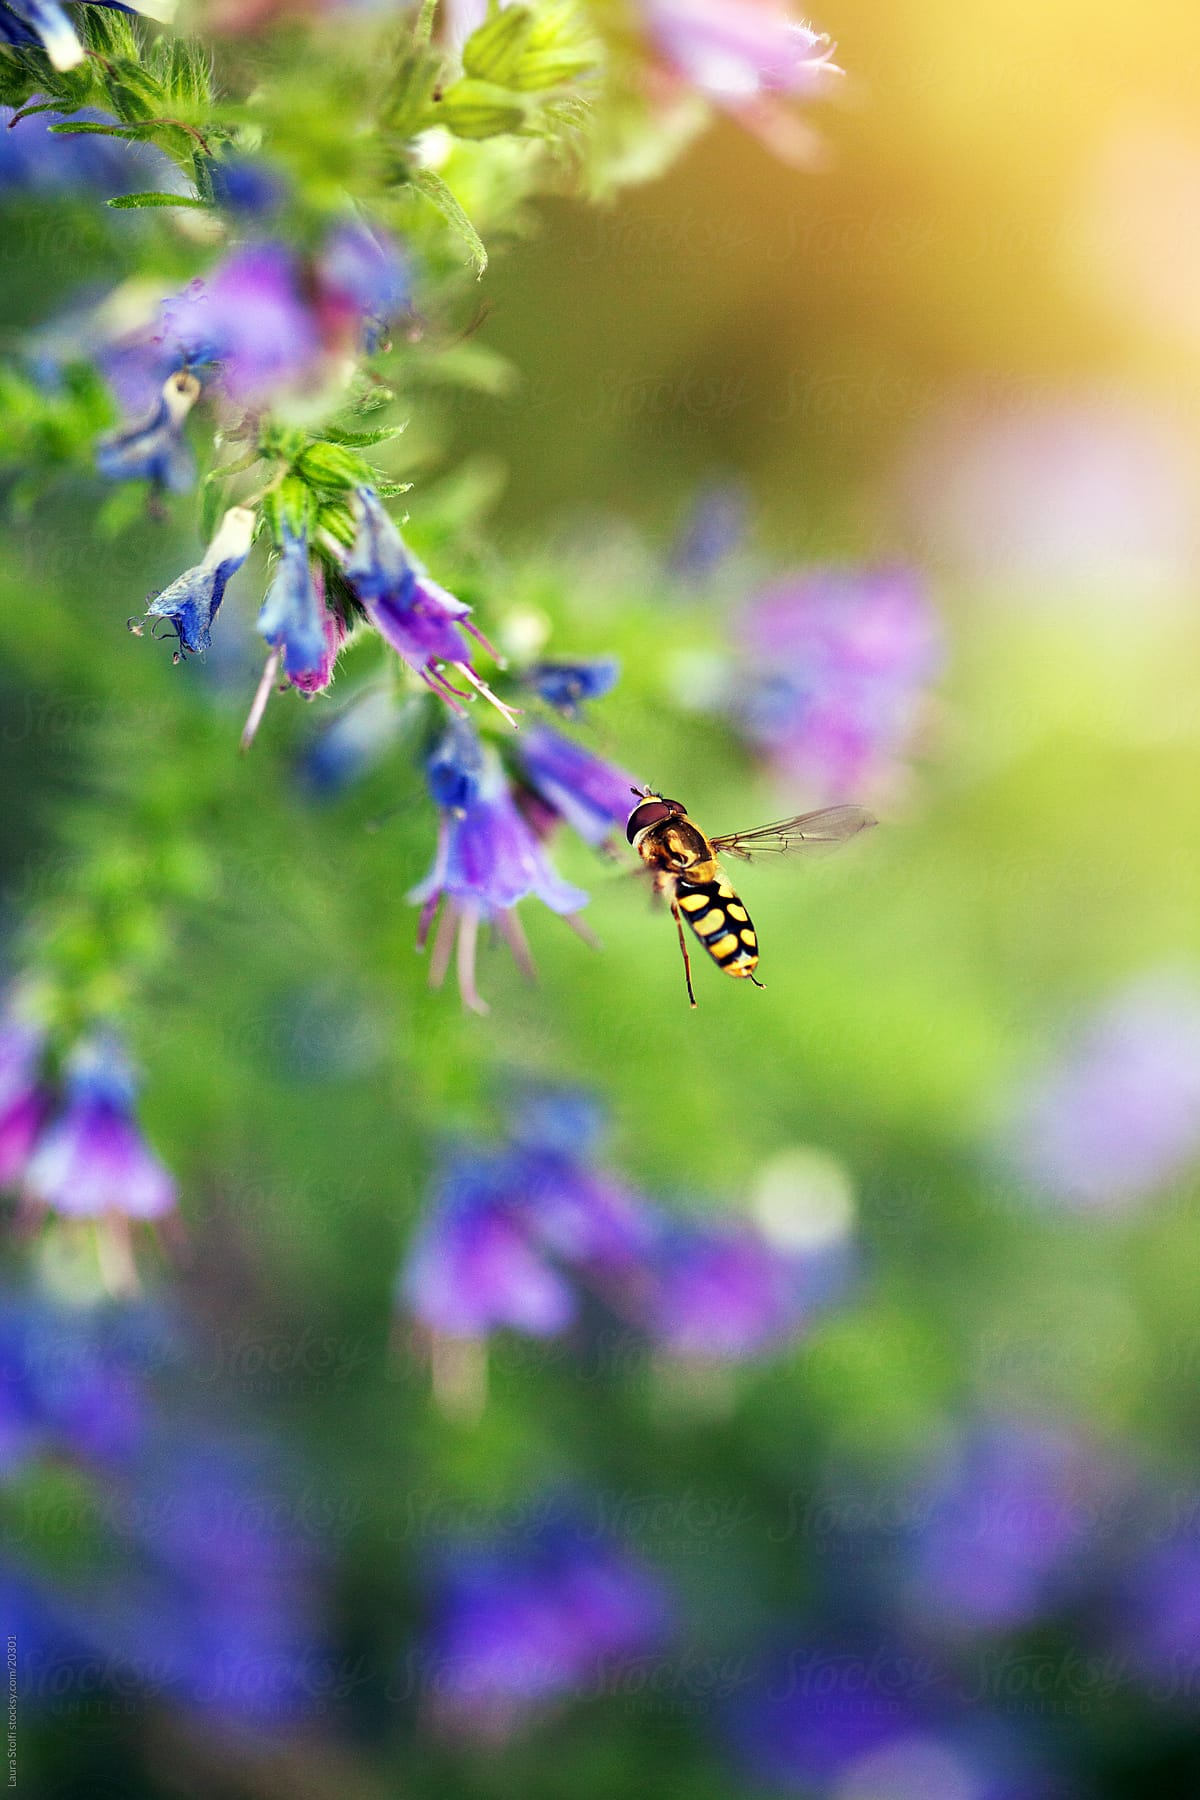 Hoverfly on Viper\'s Bugloss (Echium vulgare) flower on colorful, blurred background